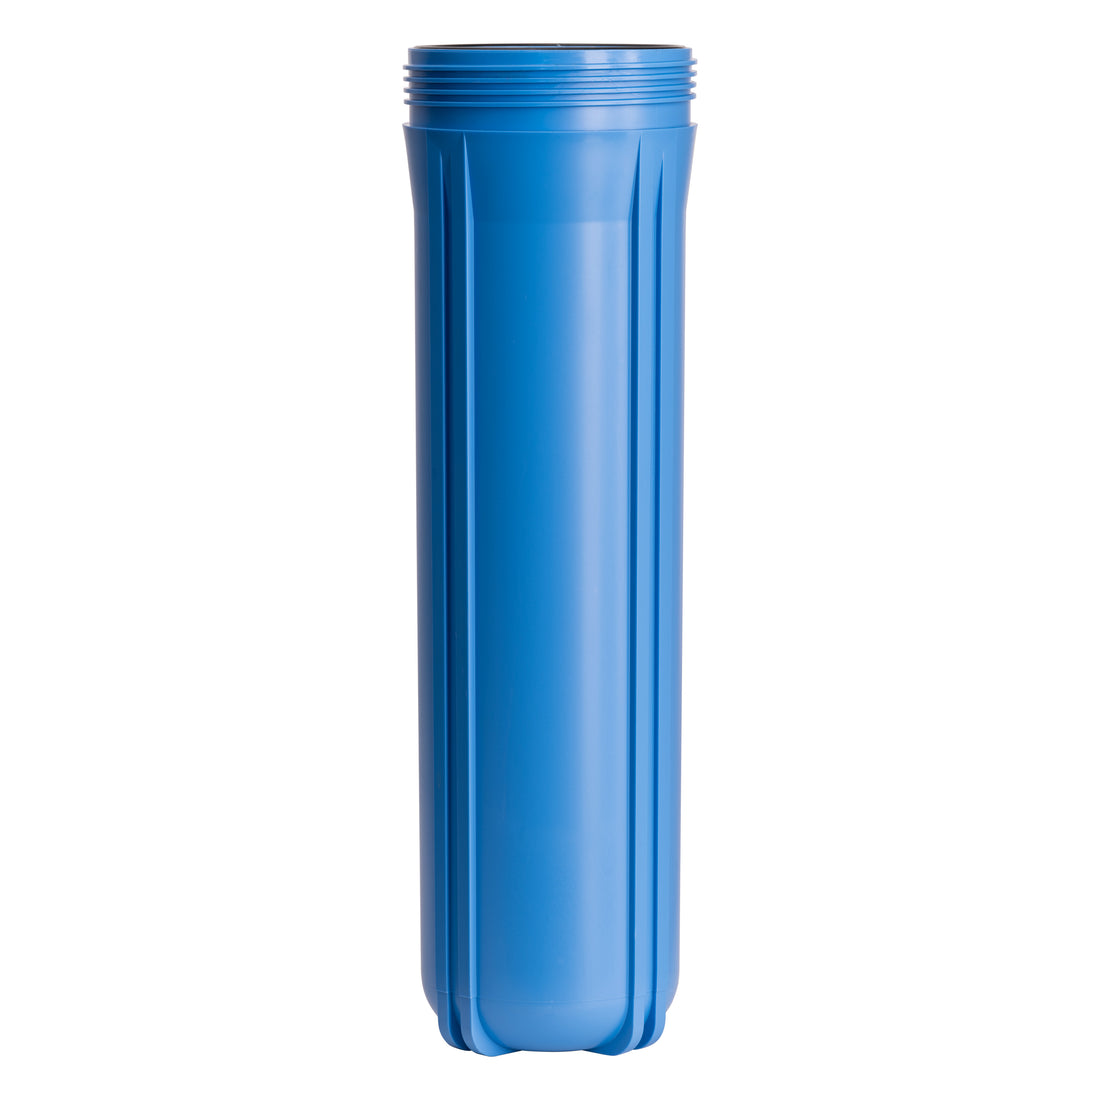 Aquasure Fortitude V &amp; V2 Series Replacement Housing Canister - Large Size